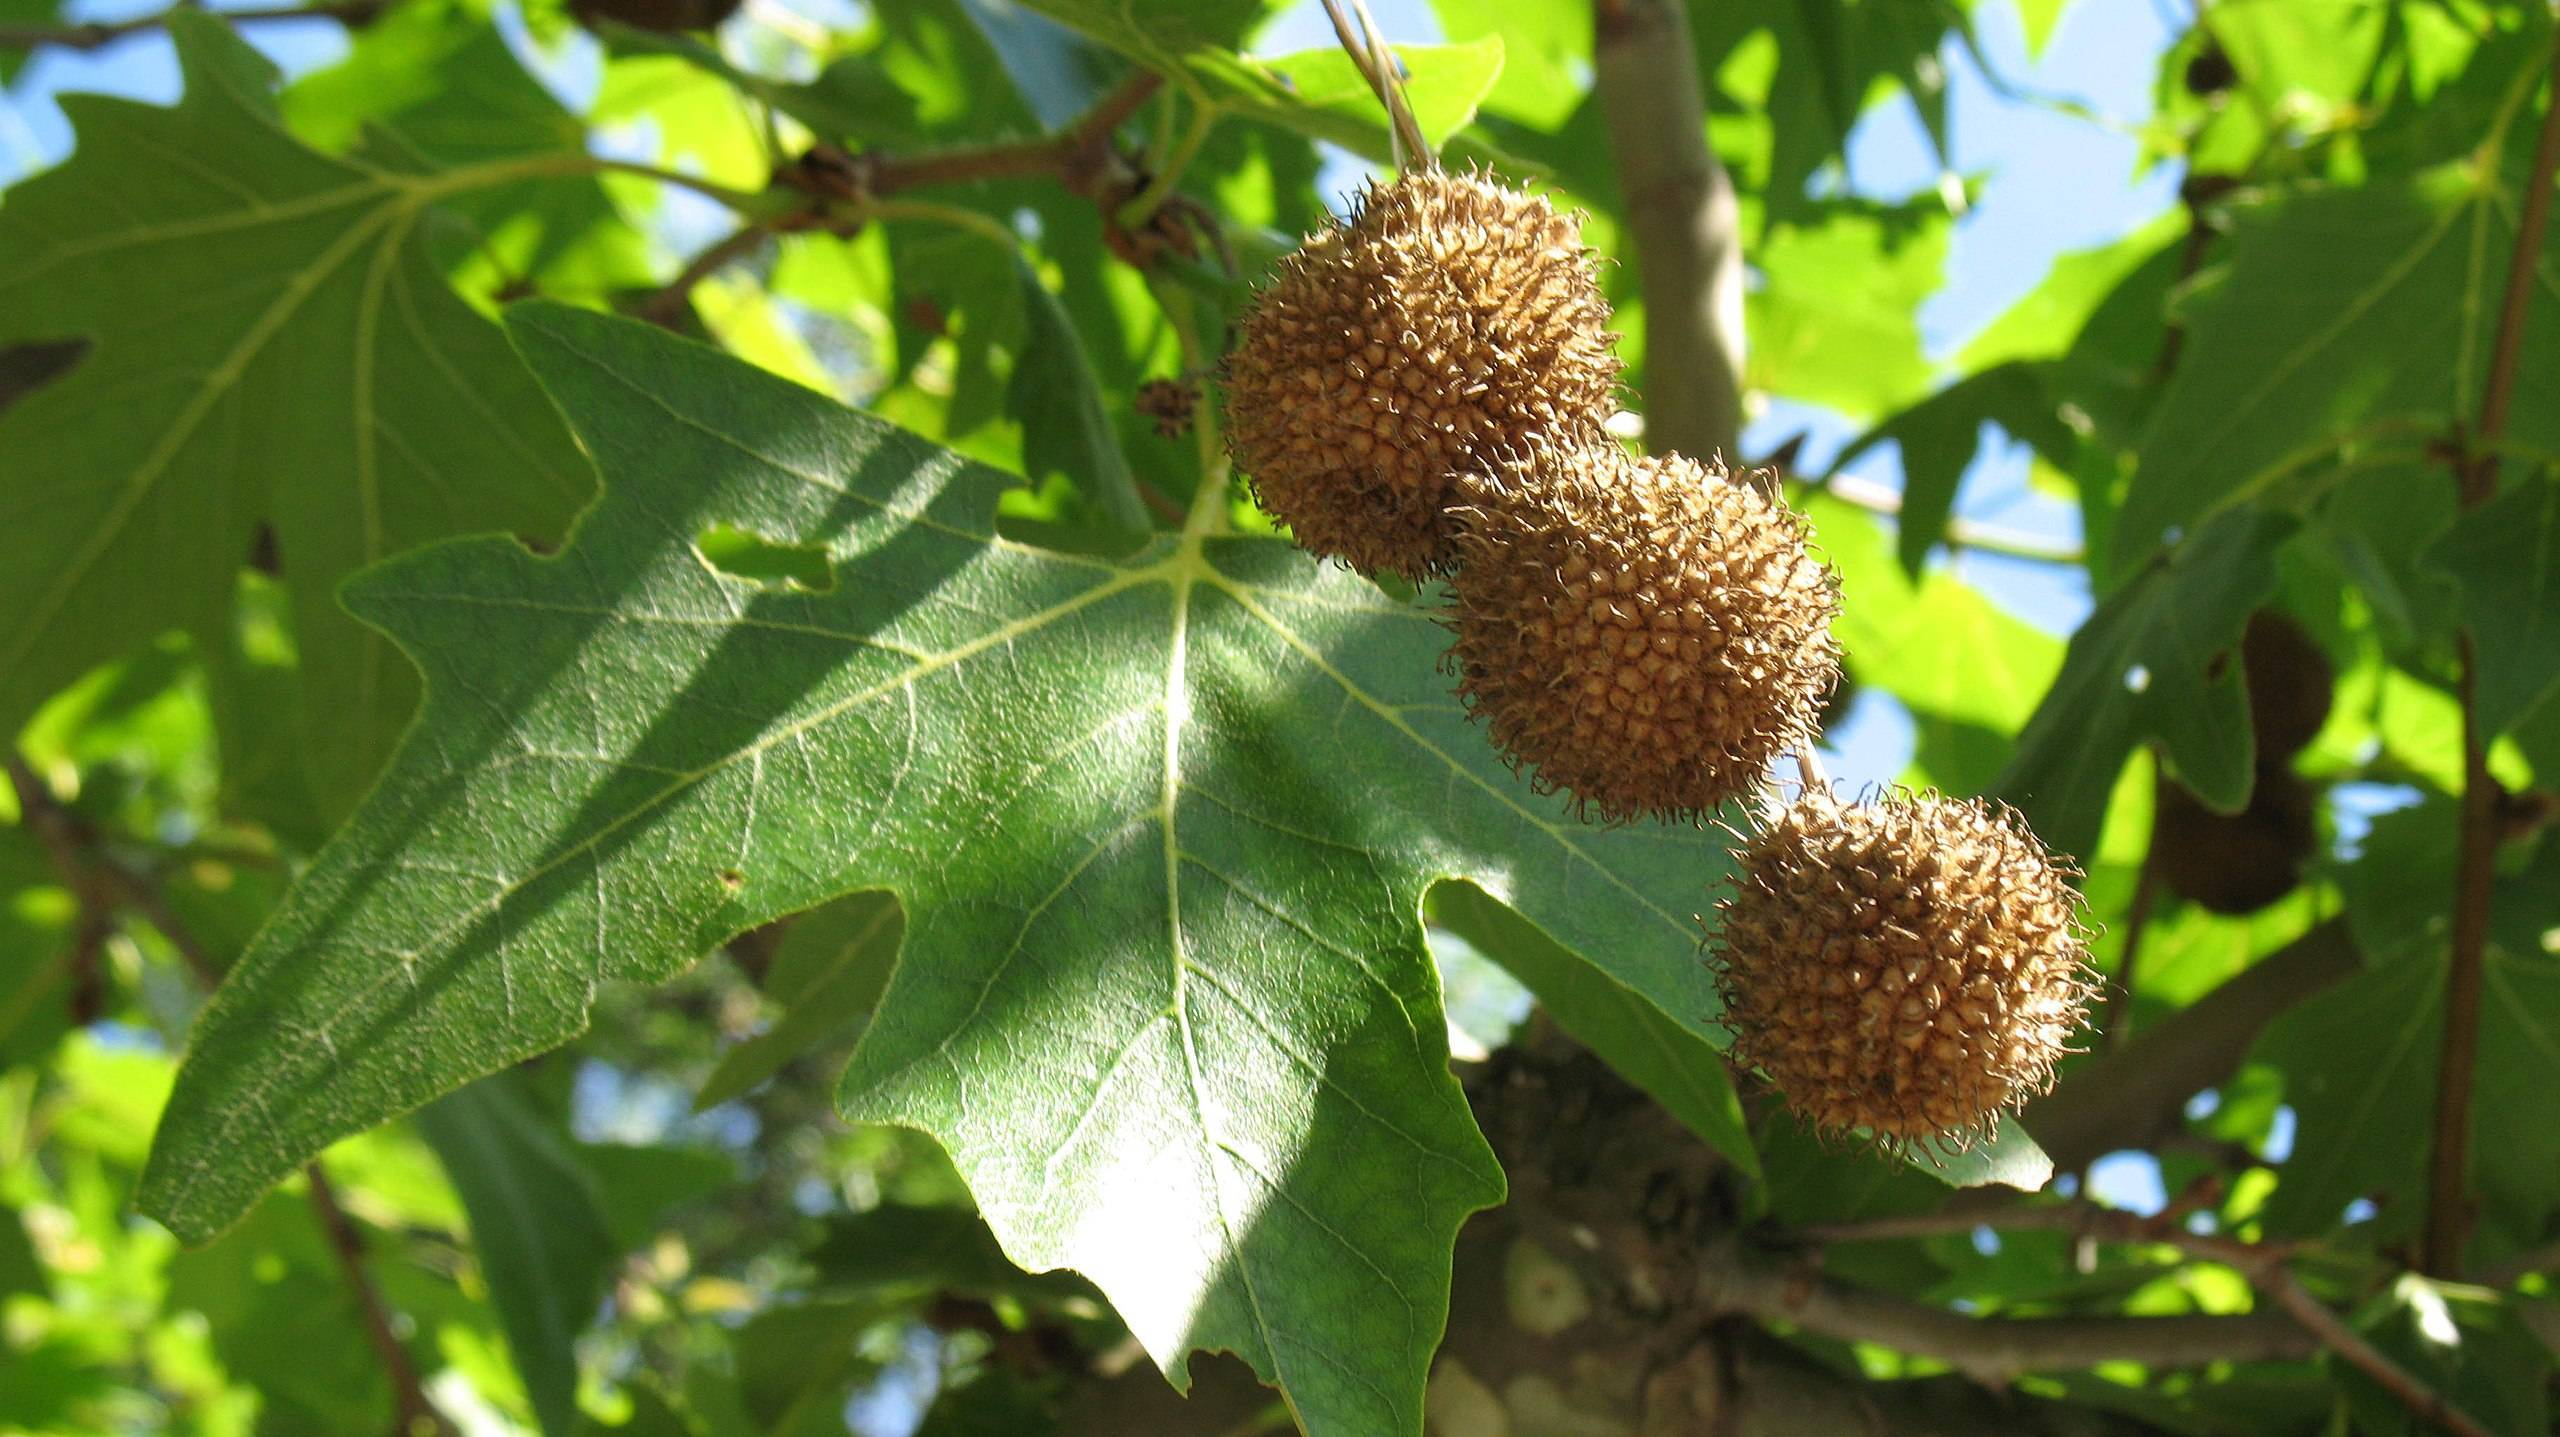 brown fruits with green leaves and lime petioles on brown branches